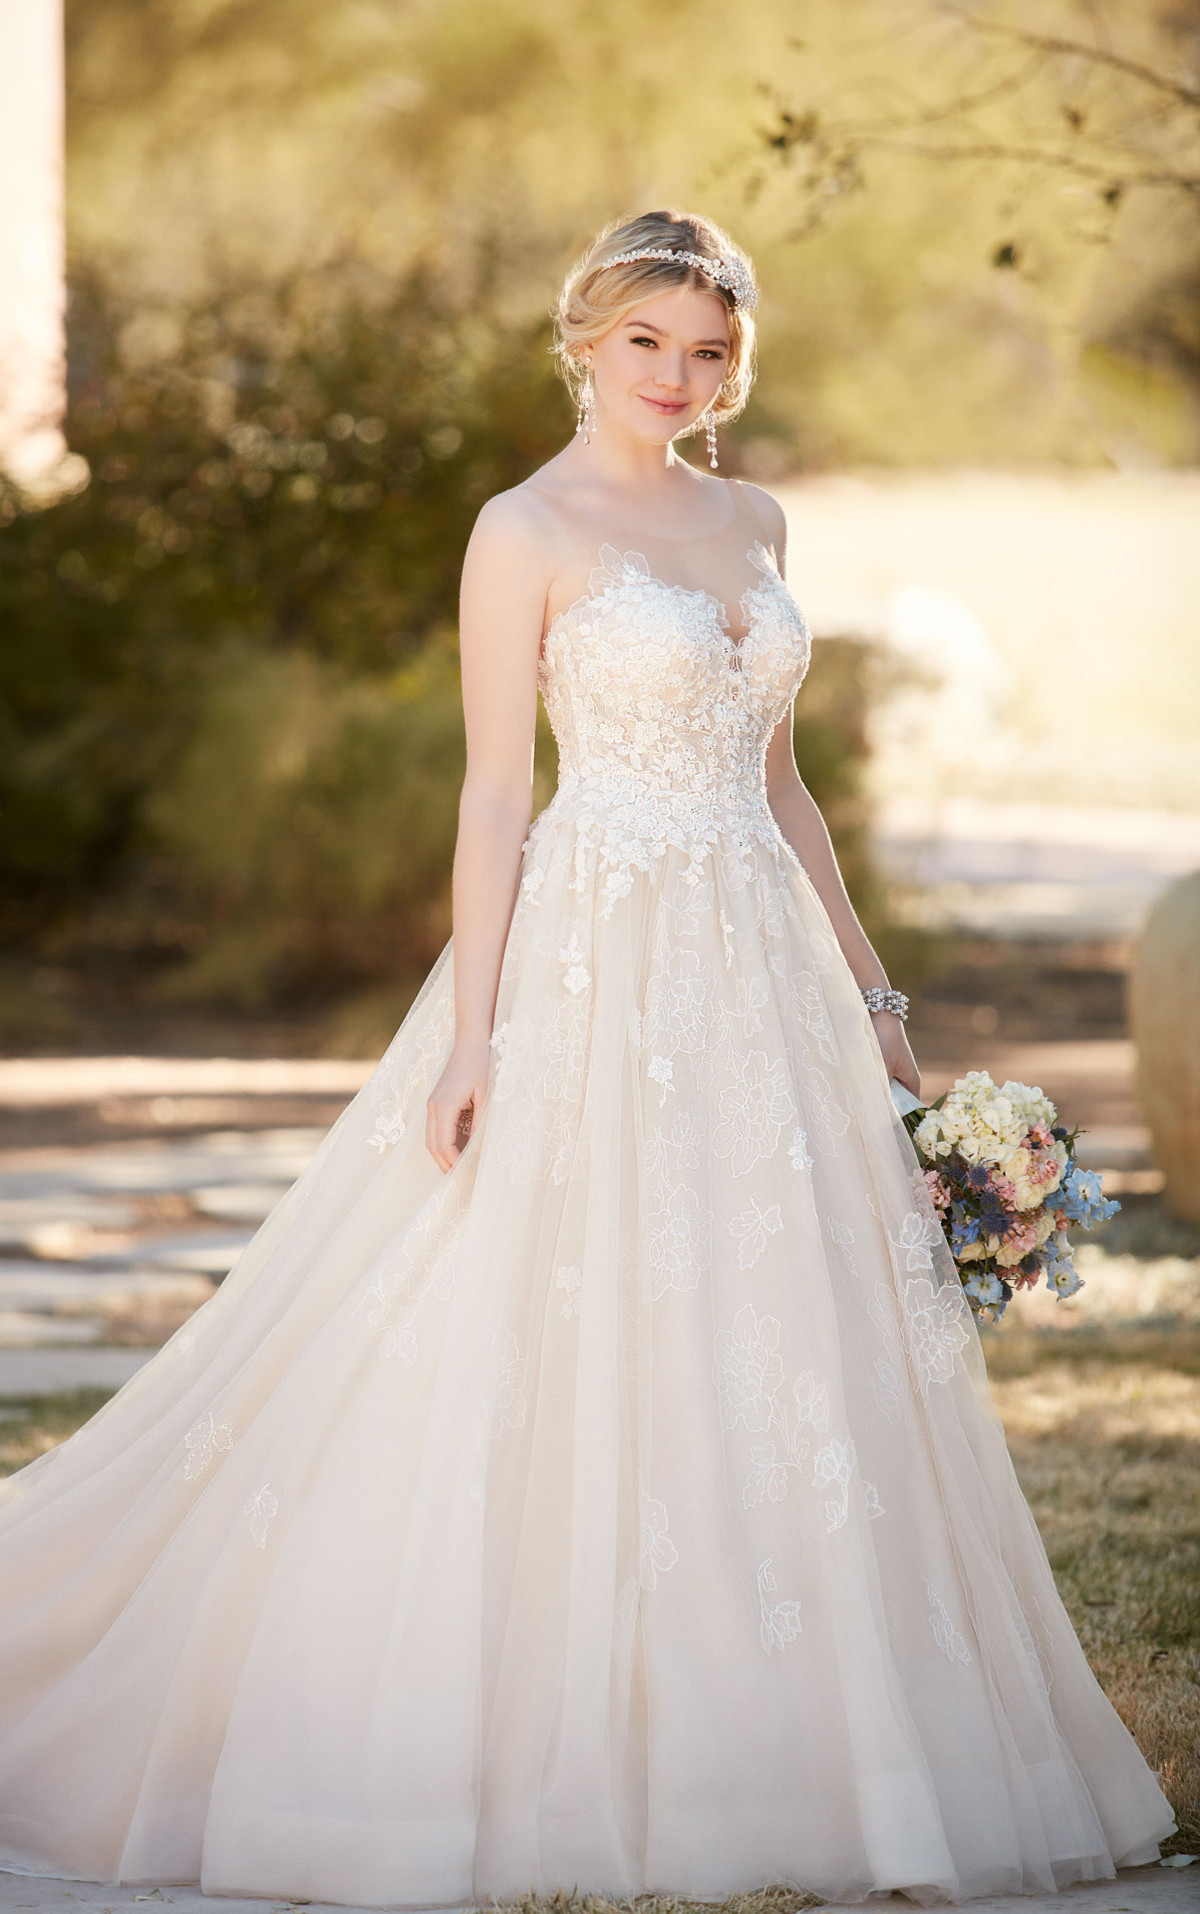 Tulle Ball Gown Wedding Dress
 Ball Gown Wedding Dress with Tulle Skirt